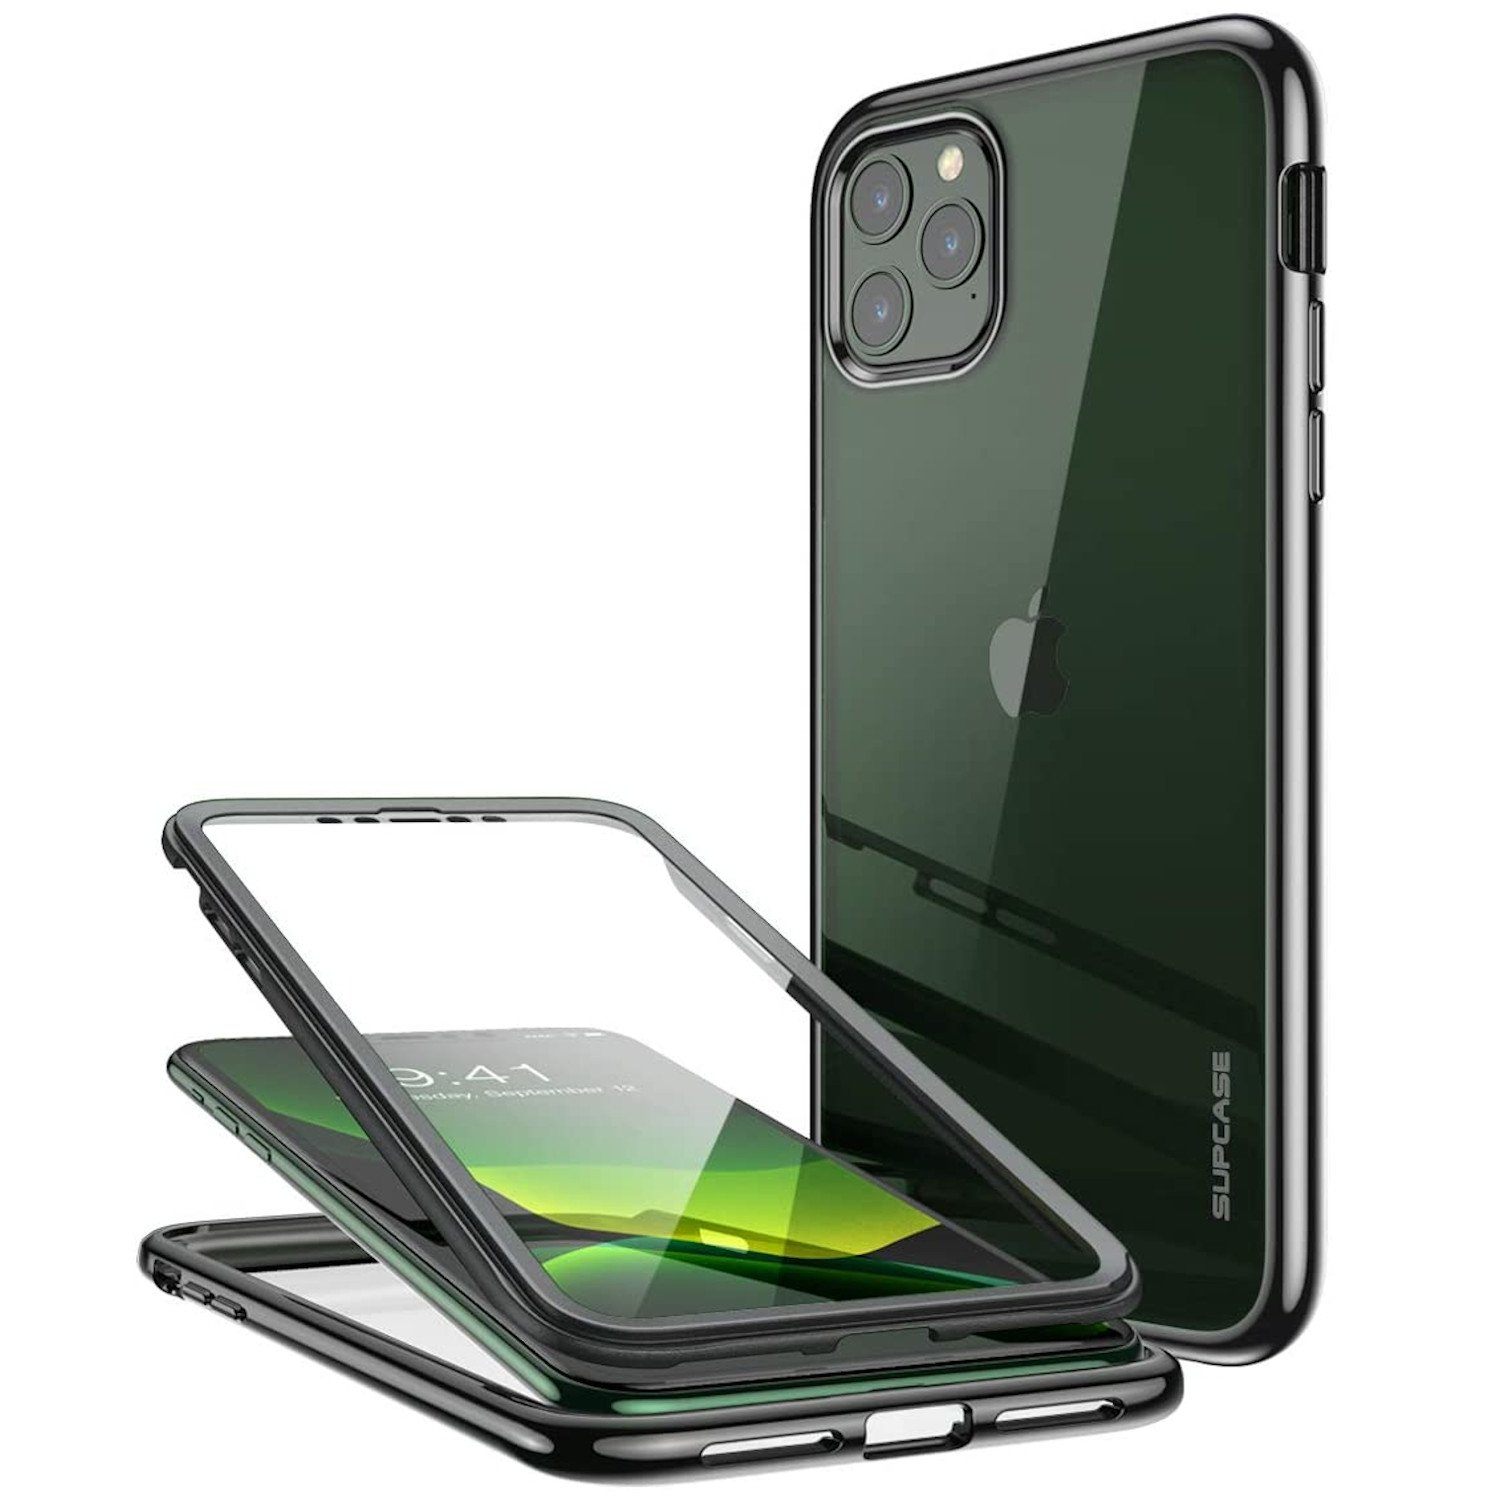 Supcase UB Electro Series Slim Hybrid Full-Body Protective Case for iPhone 11 Pro 5.8"(2019)(With Build-in Screen Protector), Black iPhone Case Supcase Black 